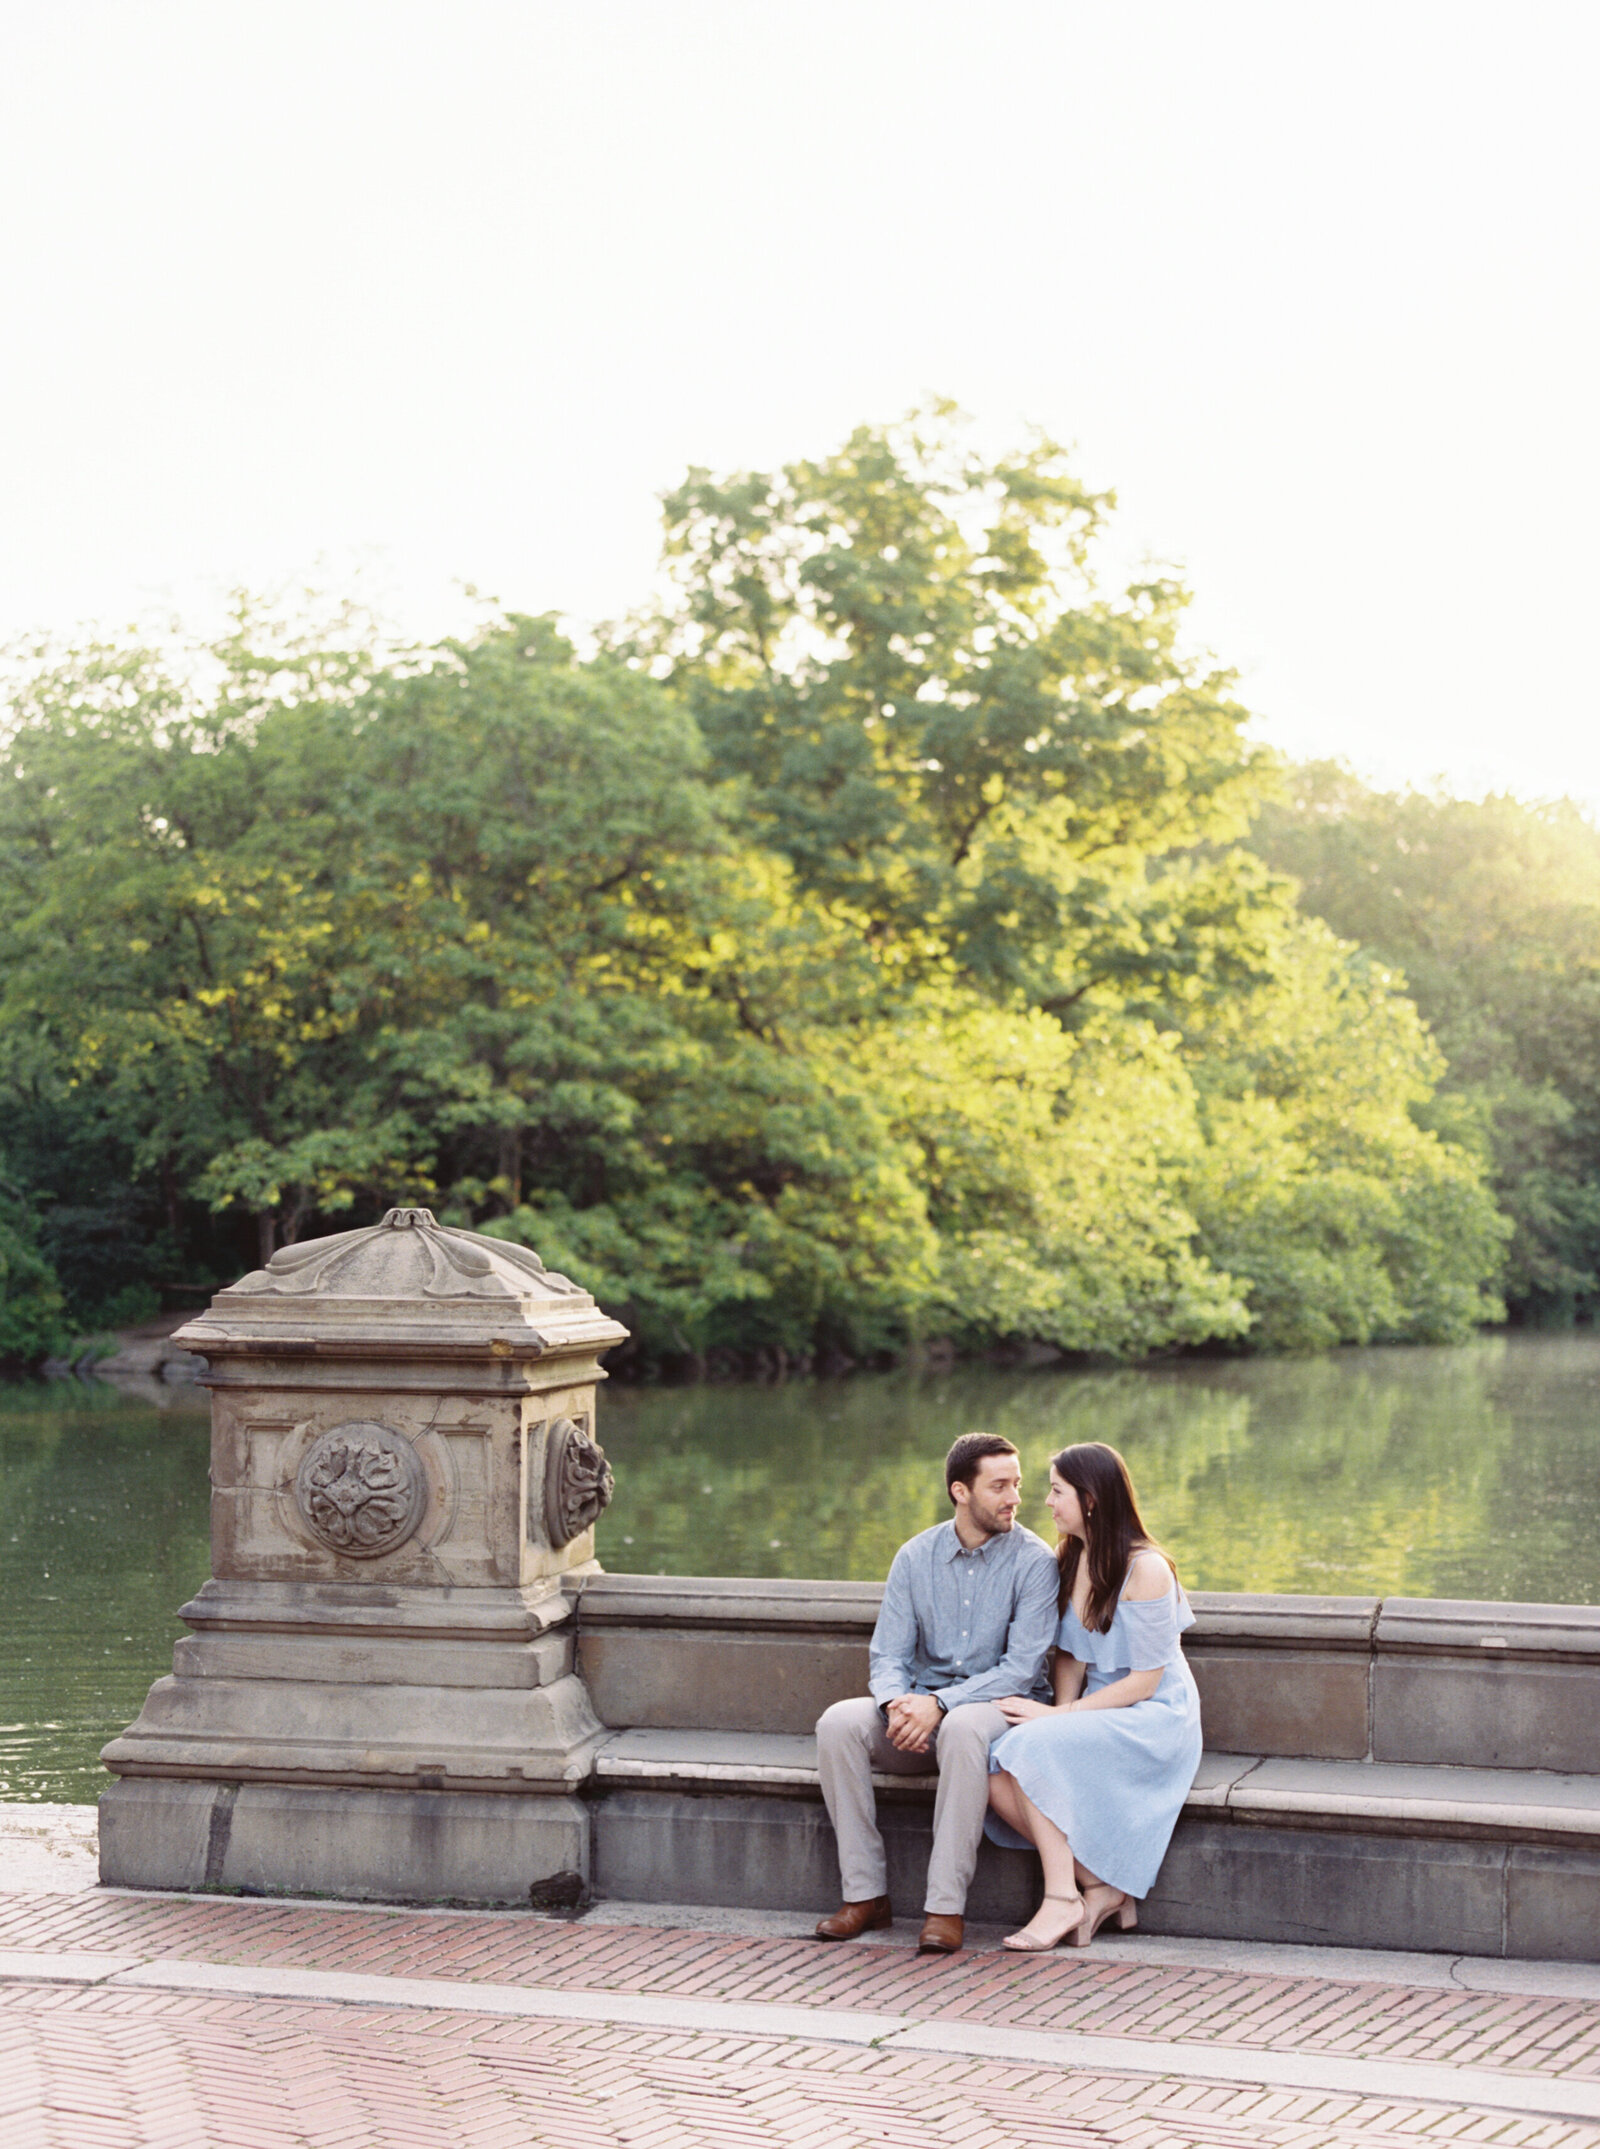 Kaylea Moreno_engagement gallery - Mike-Leia-engagement-session-5